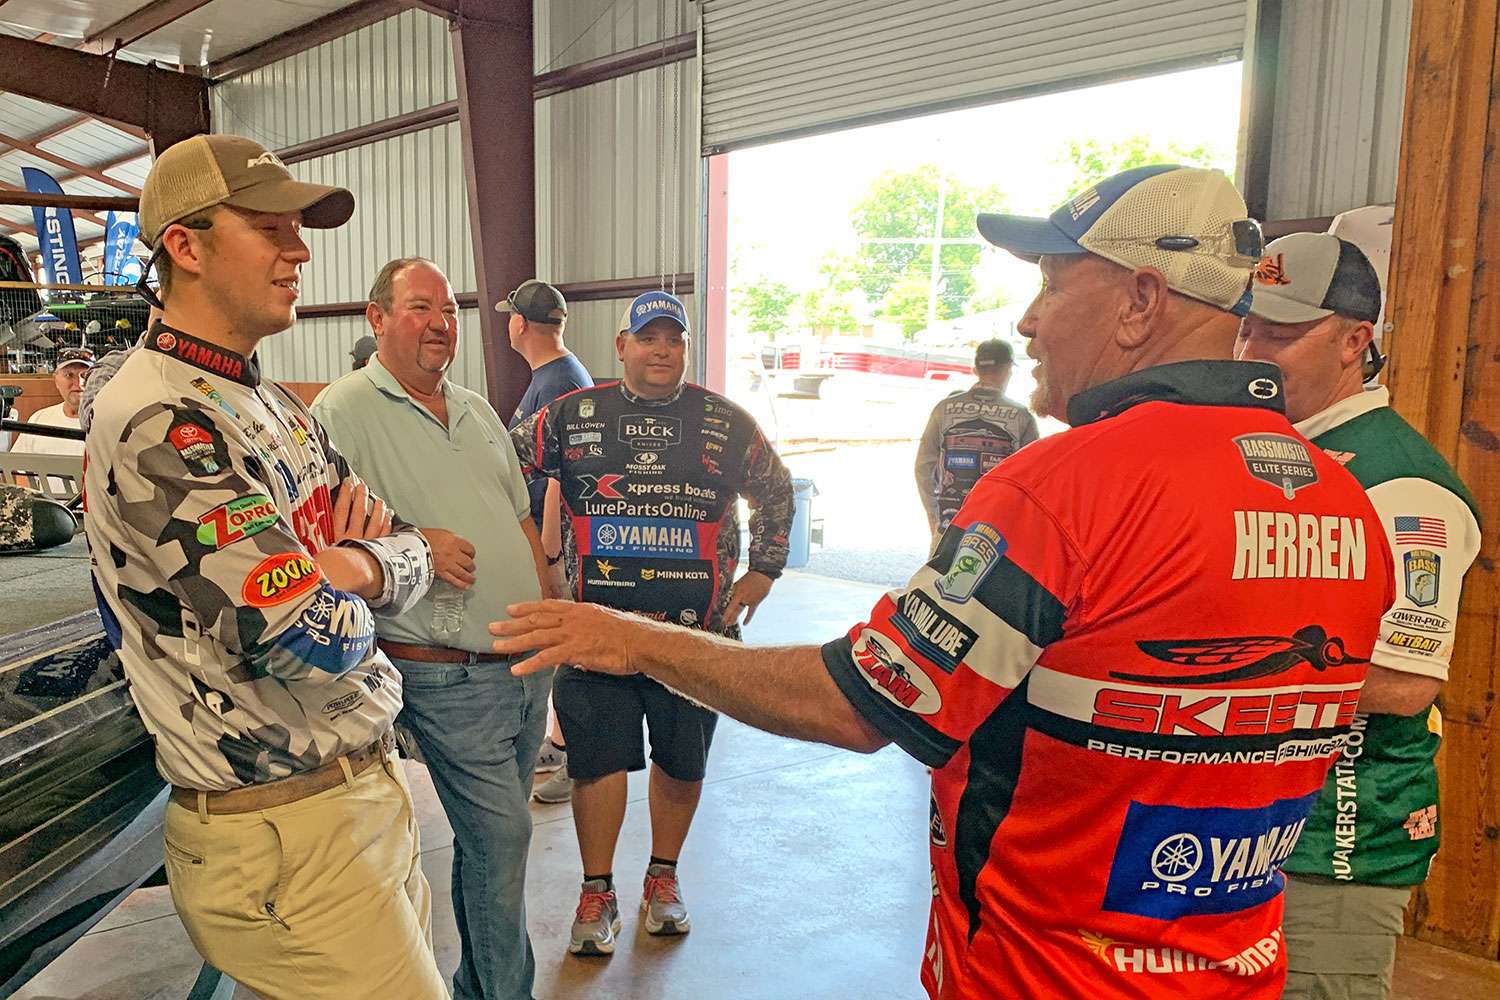 It was a great way to kick off a week of fishing at Lake Guntersville. Special thanks to Buck's Island for hosting the event, it was a lot of fun!